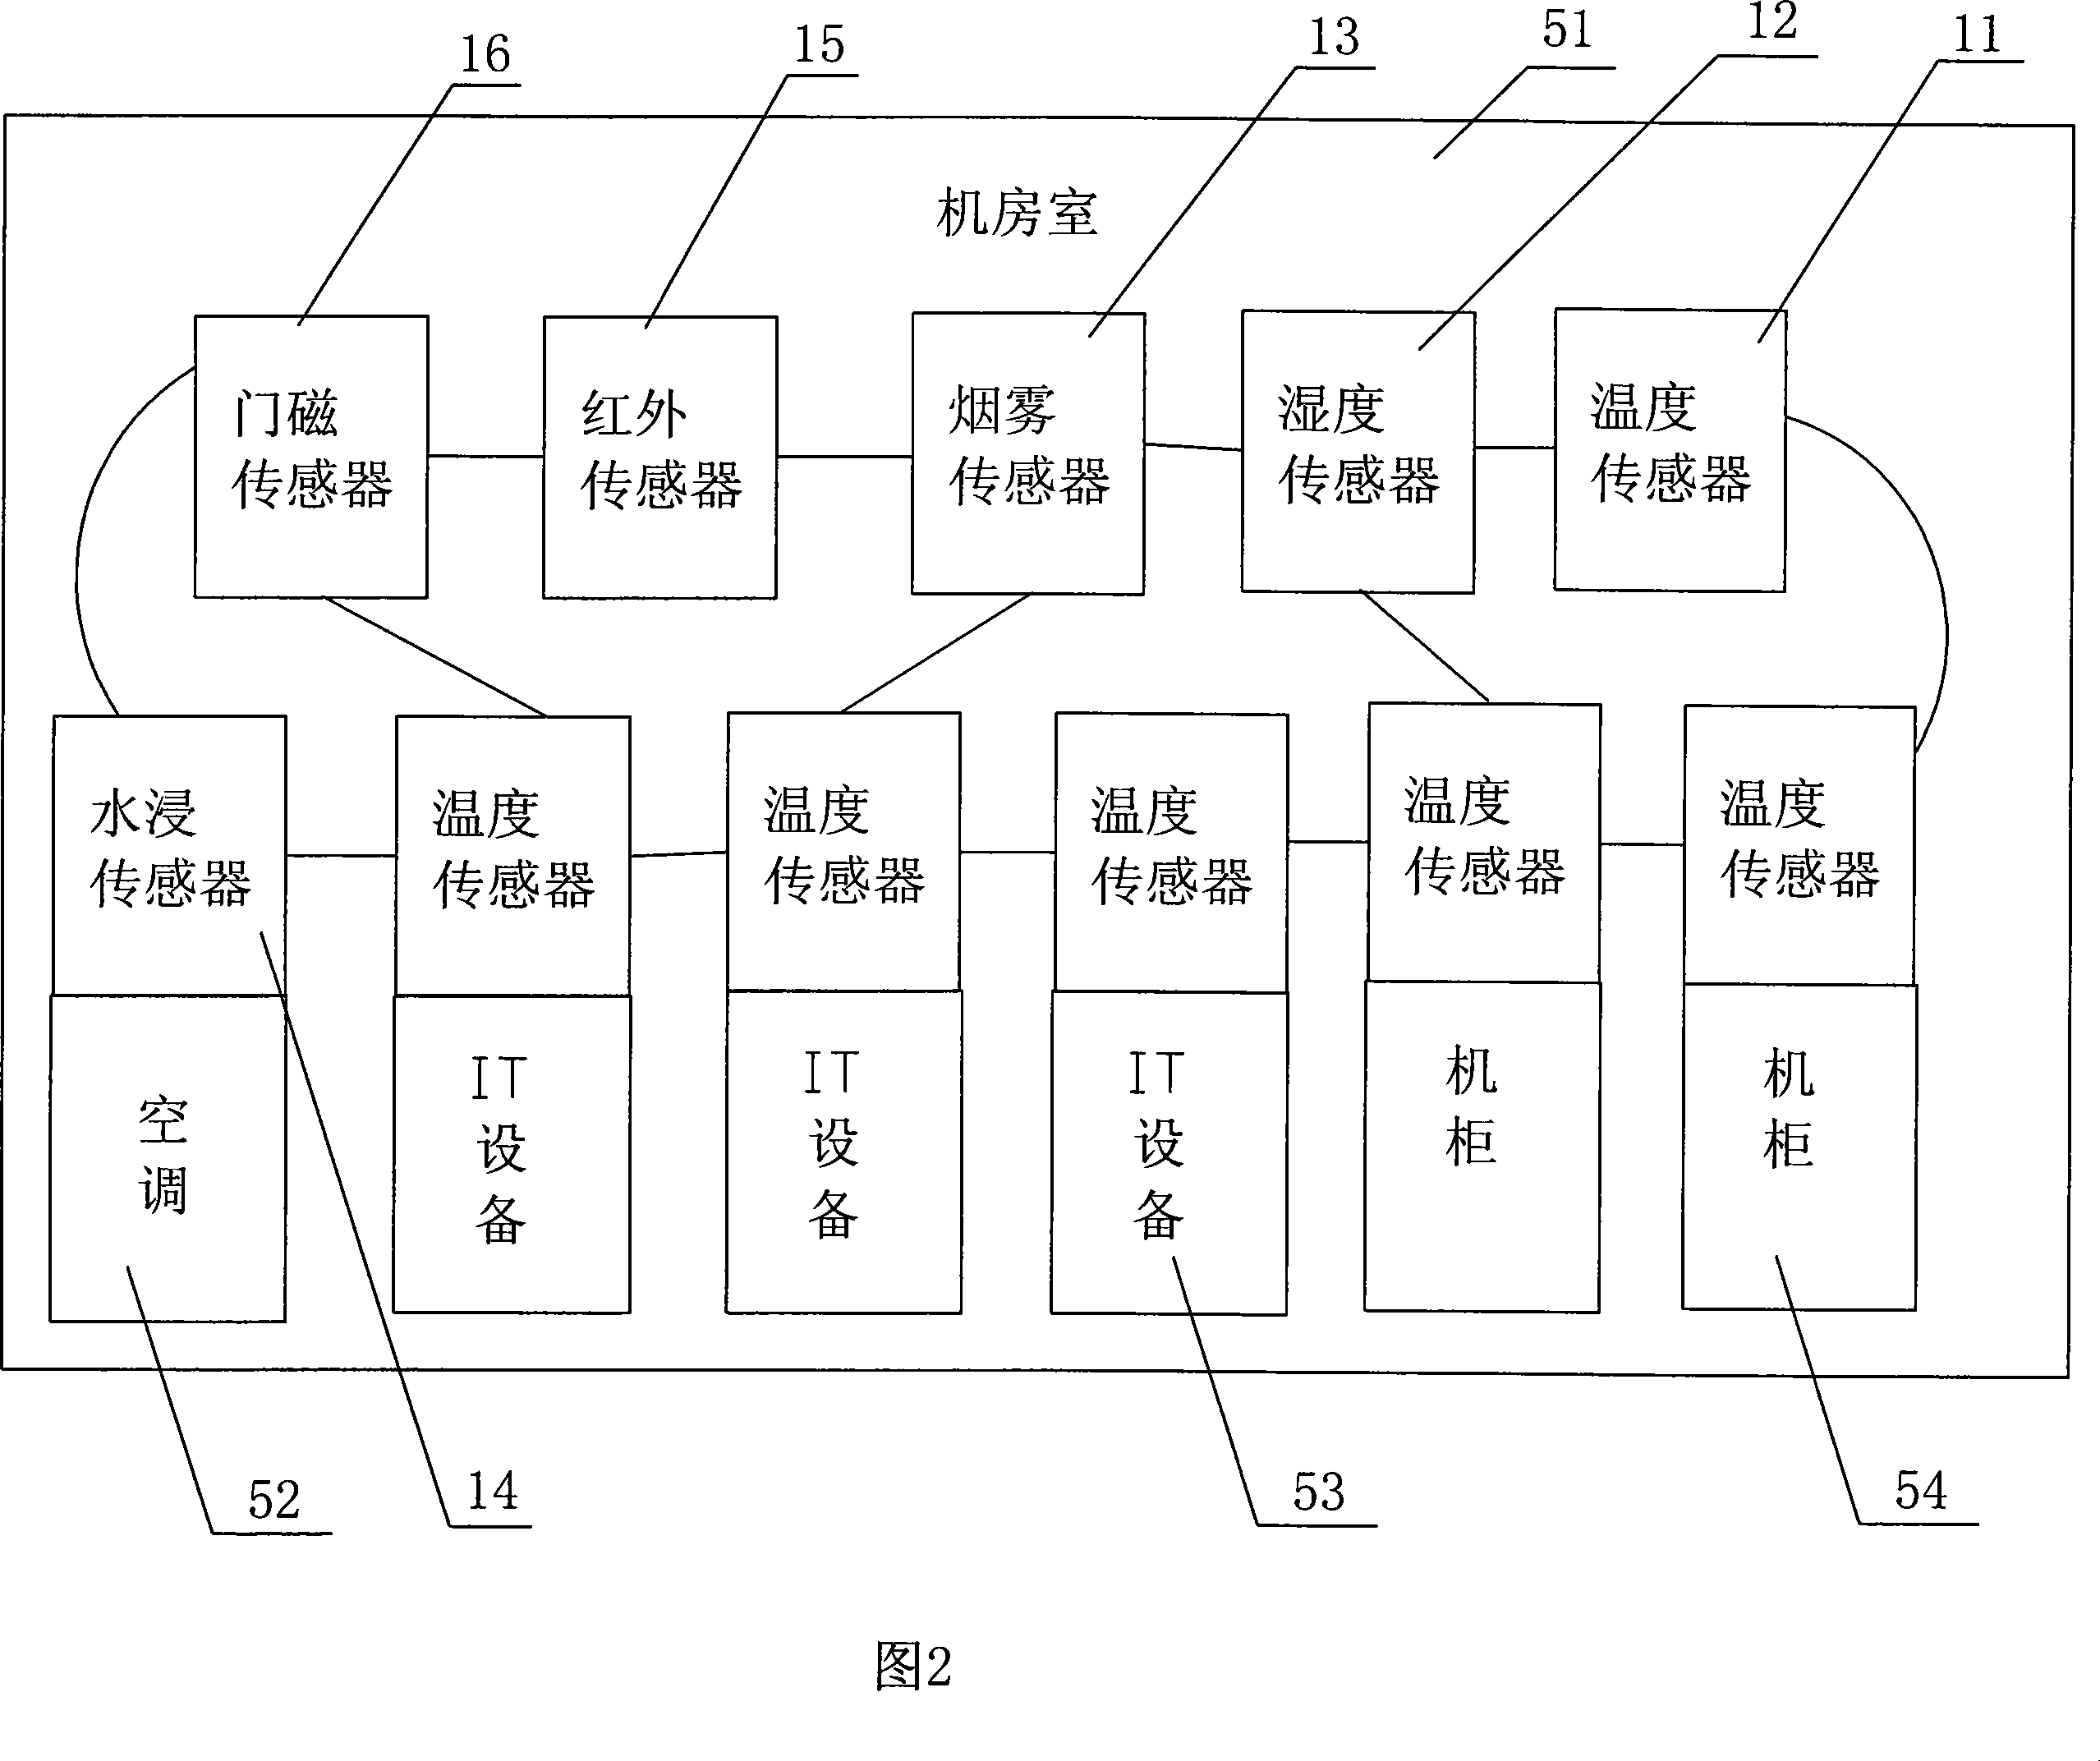 Machinery room environmental monitoring system and method